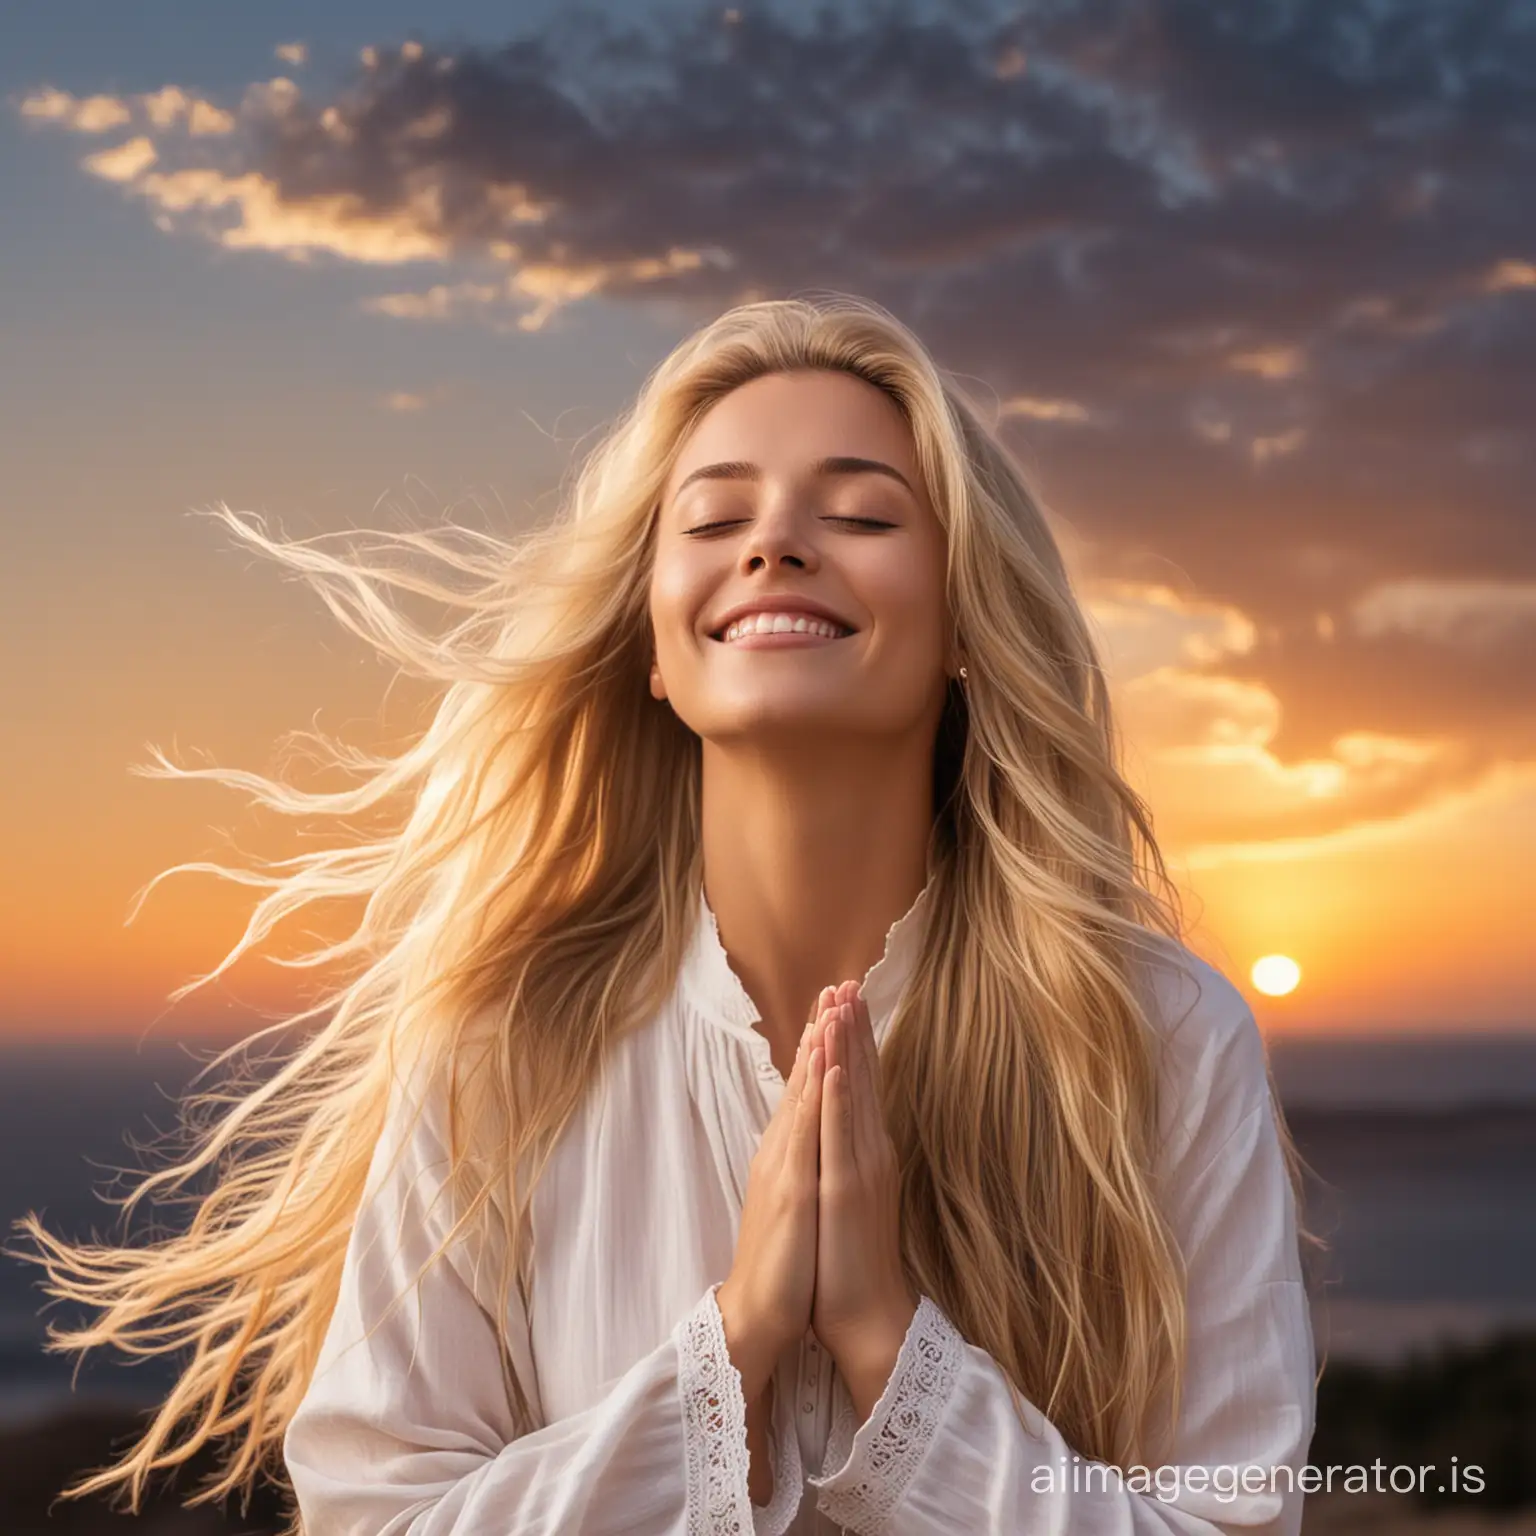 woman with closed eyes, long blonde hair with wind in the hair, illuminated sky in the background, smiling and hands in prayer position